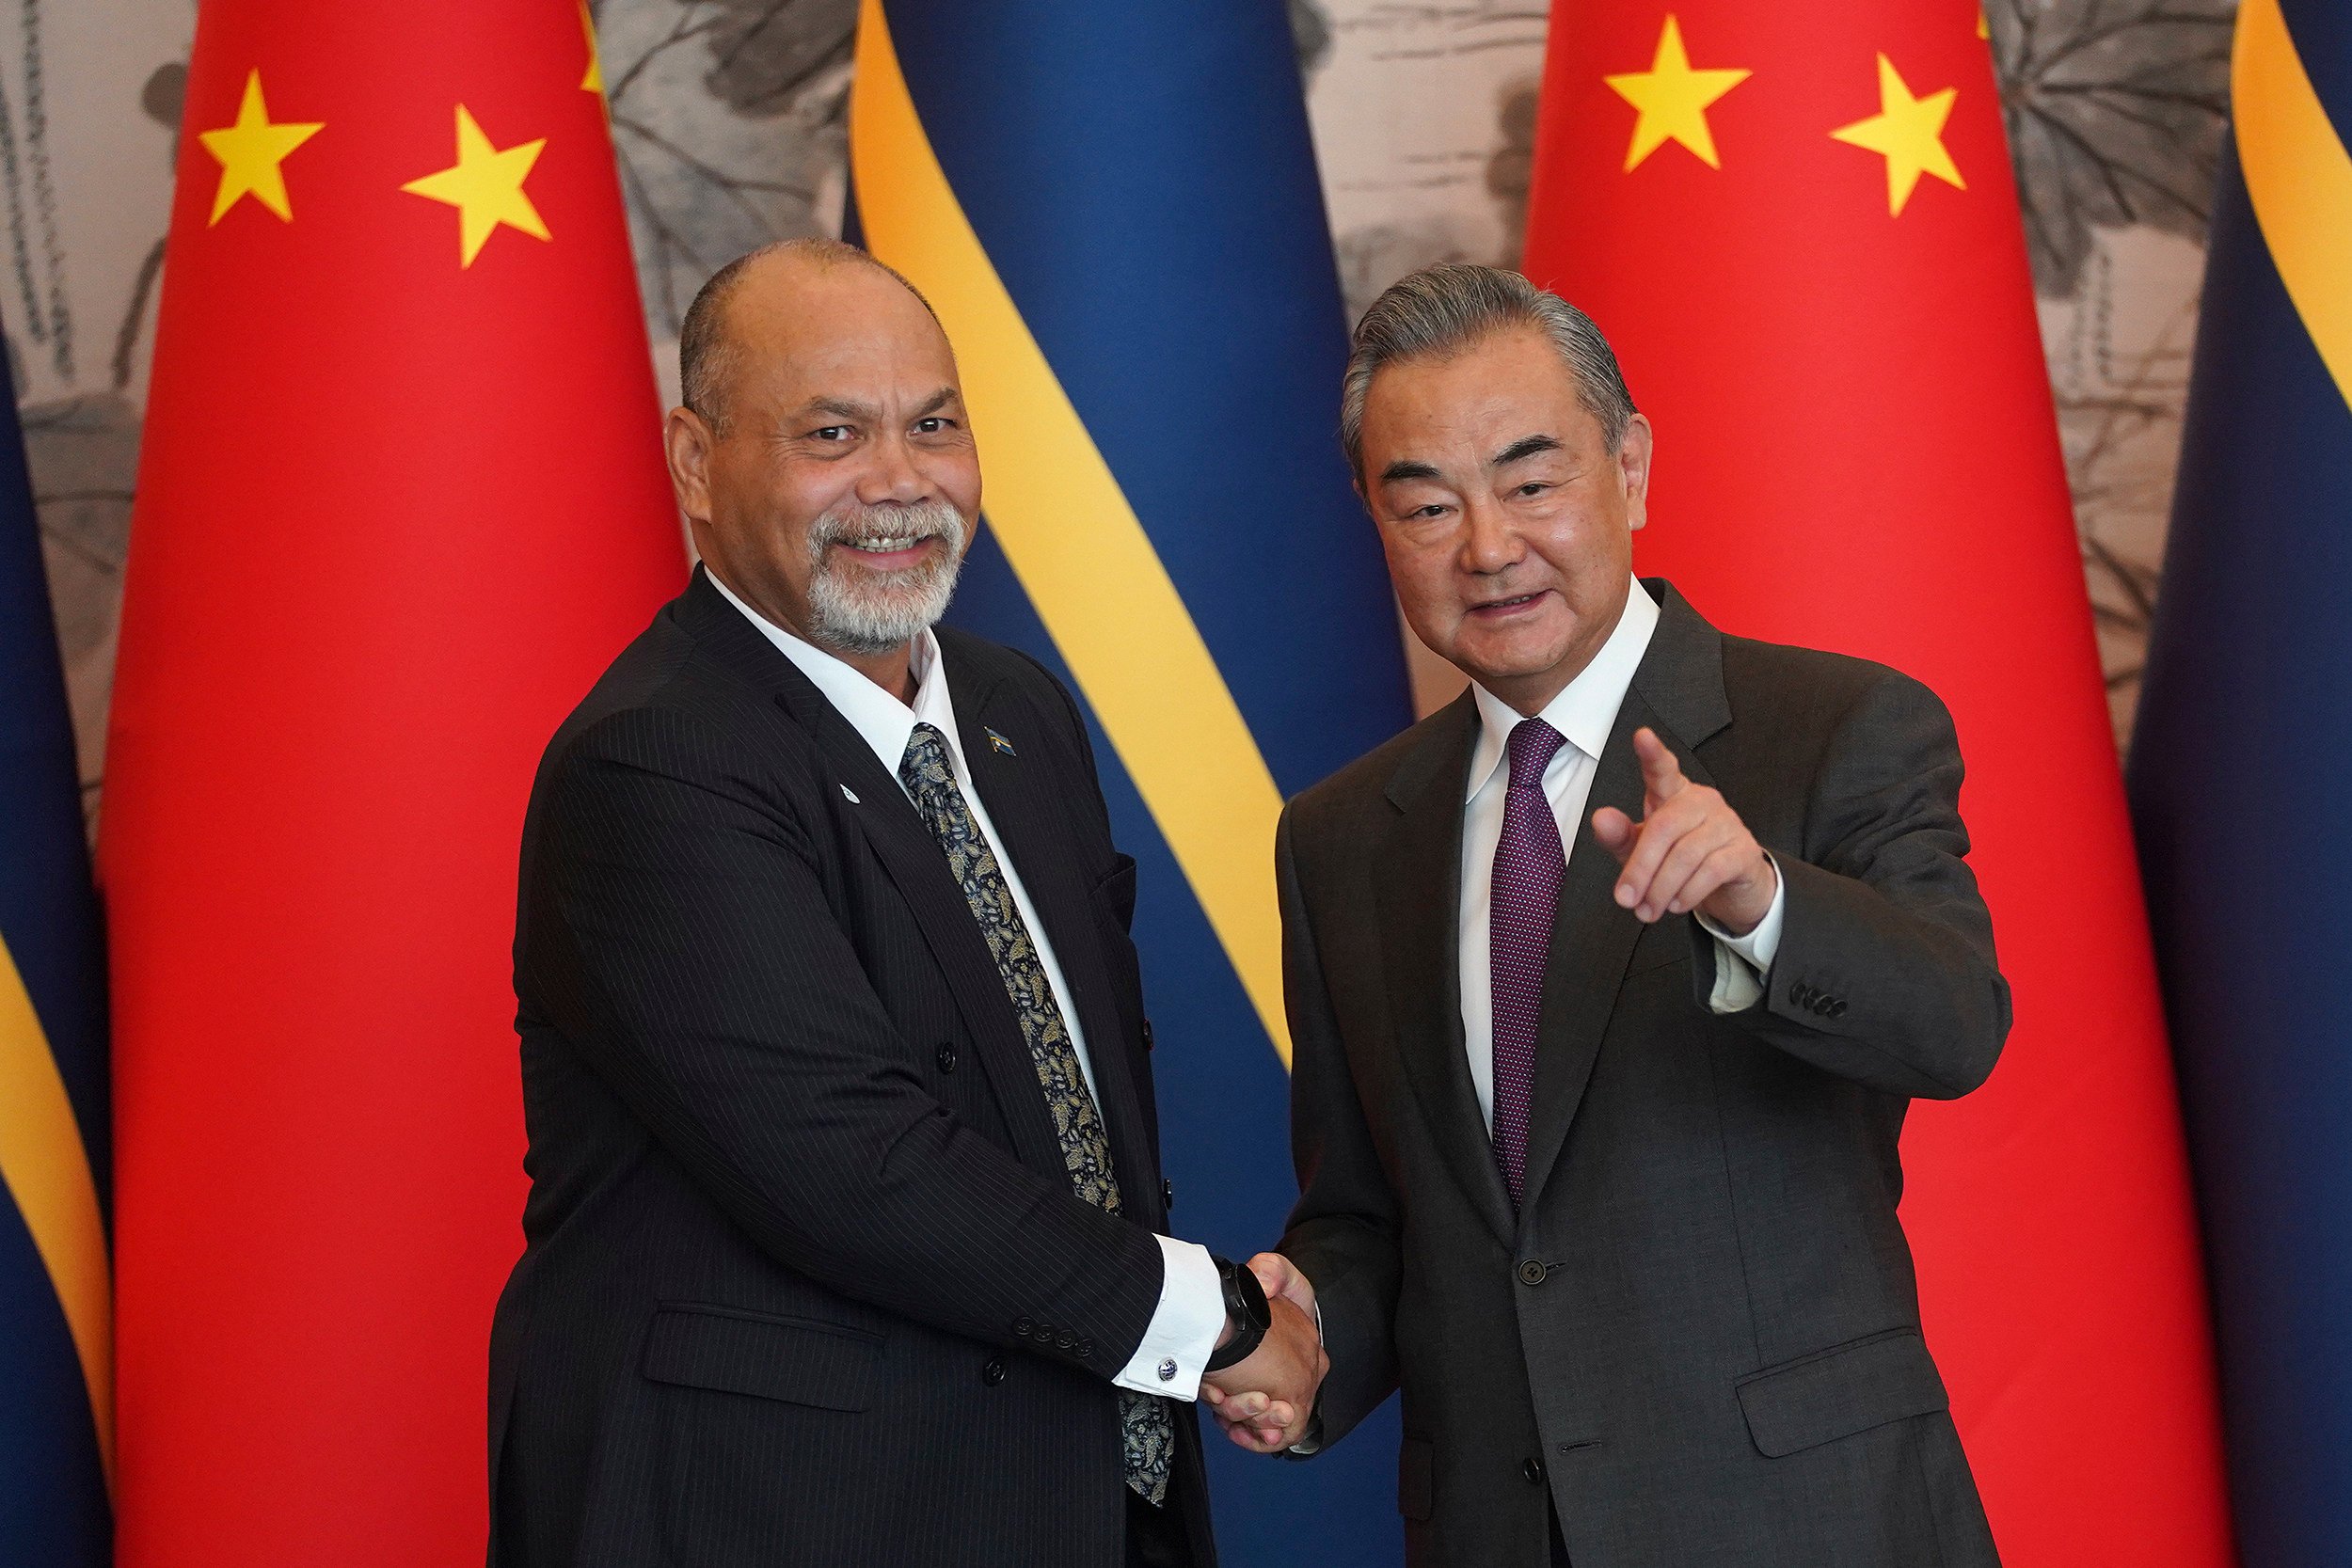 Chinese Foreign Minister Wang Yi (right) and his Nauru counterpart Lionel Aingimea shake hands after signing the joint communique on the resumption of diplomatic relations between China and Nauru in Beijing on January 24. Photo: AP